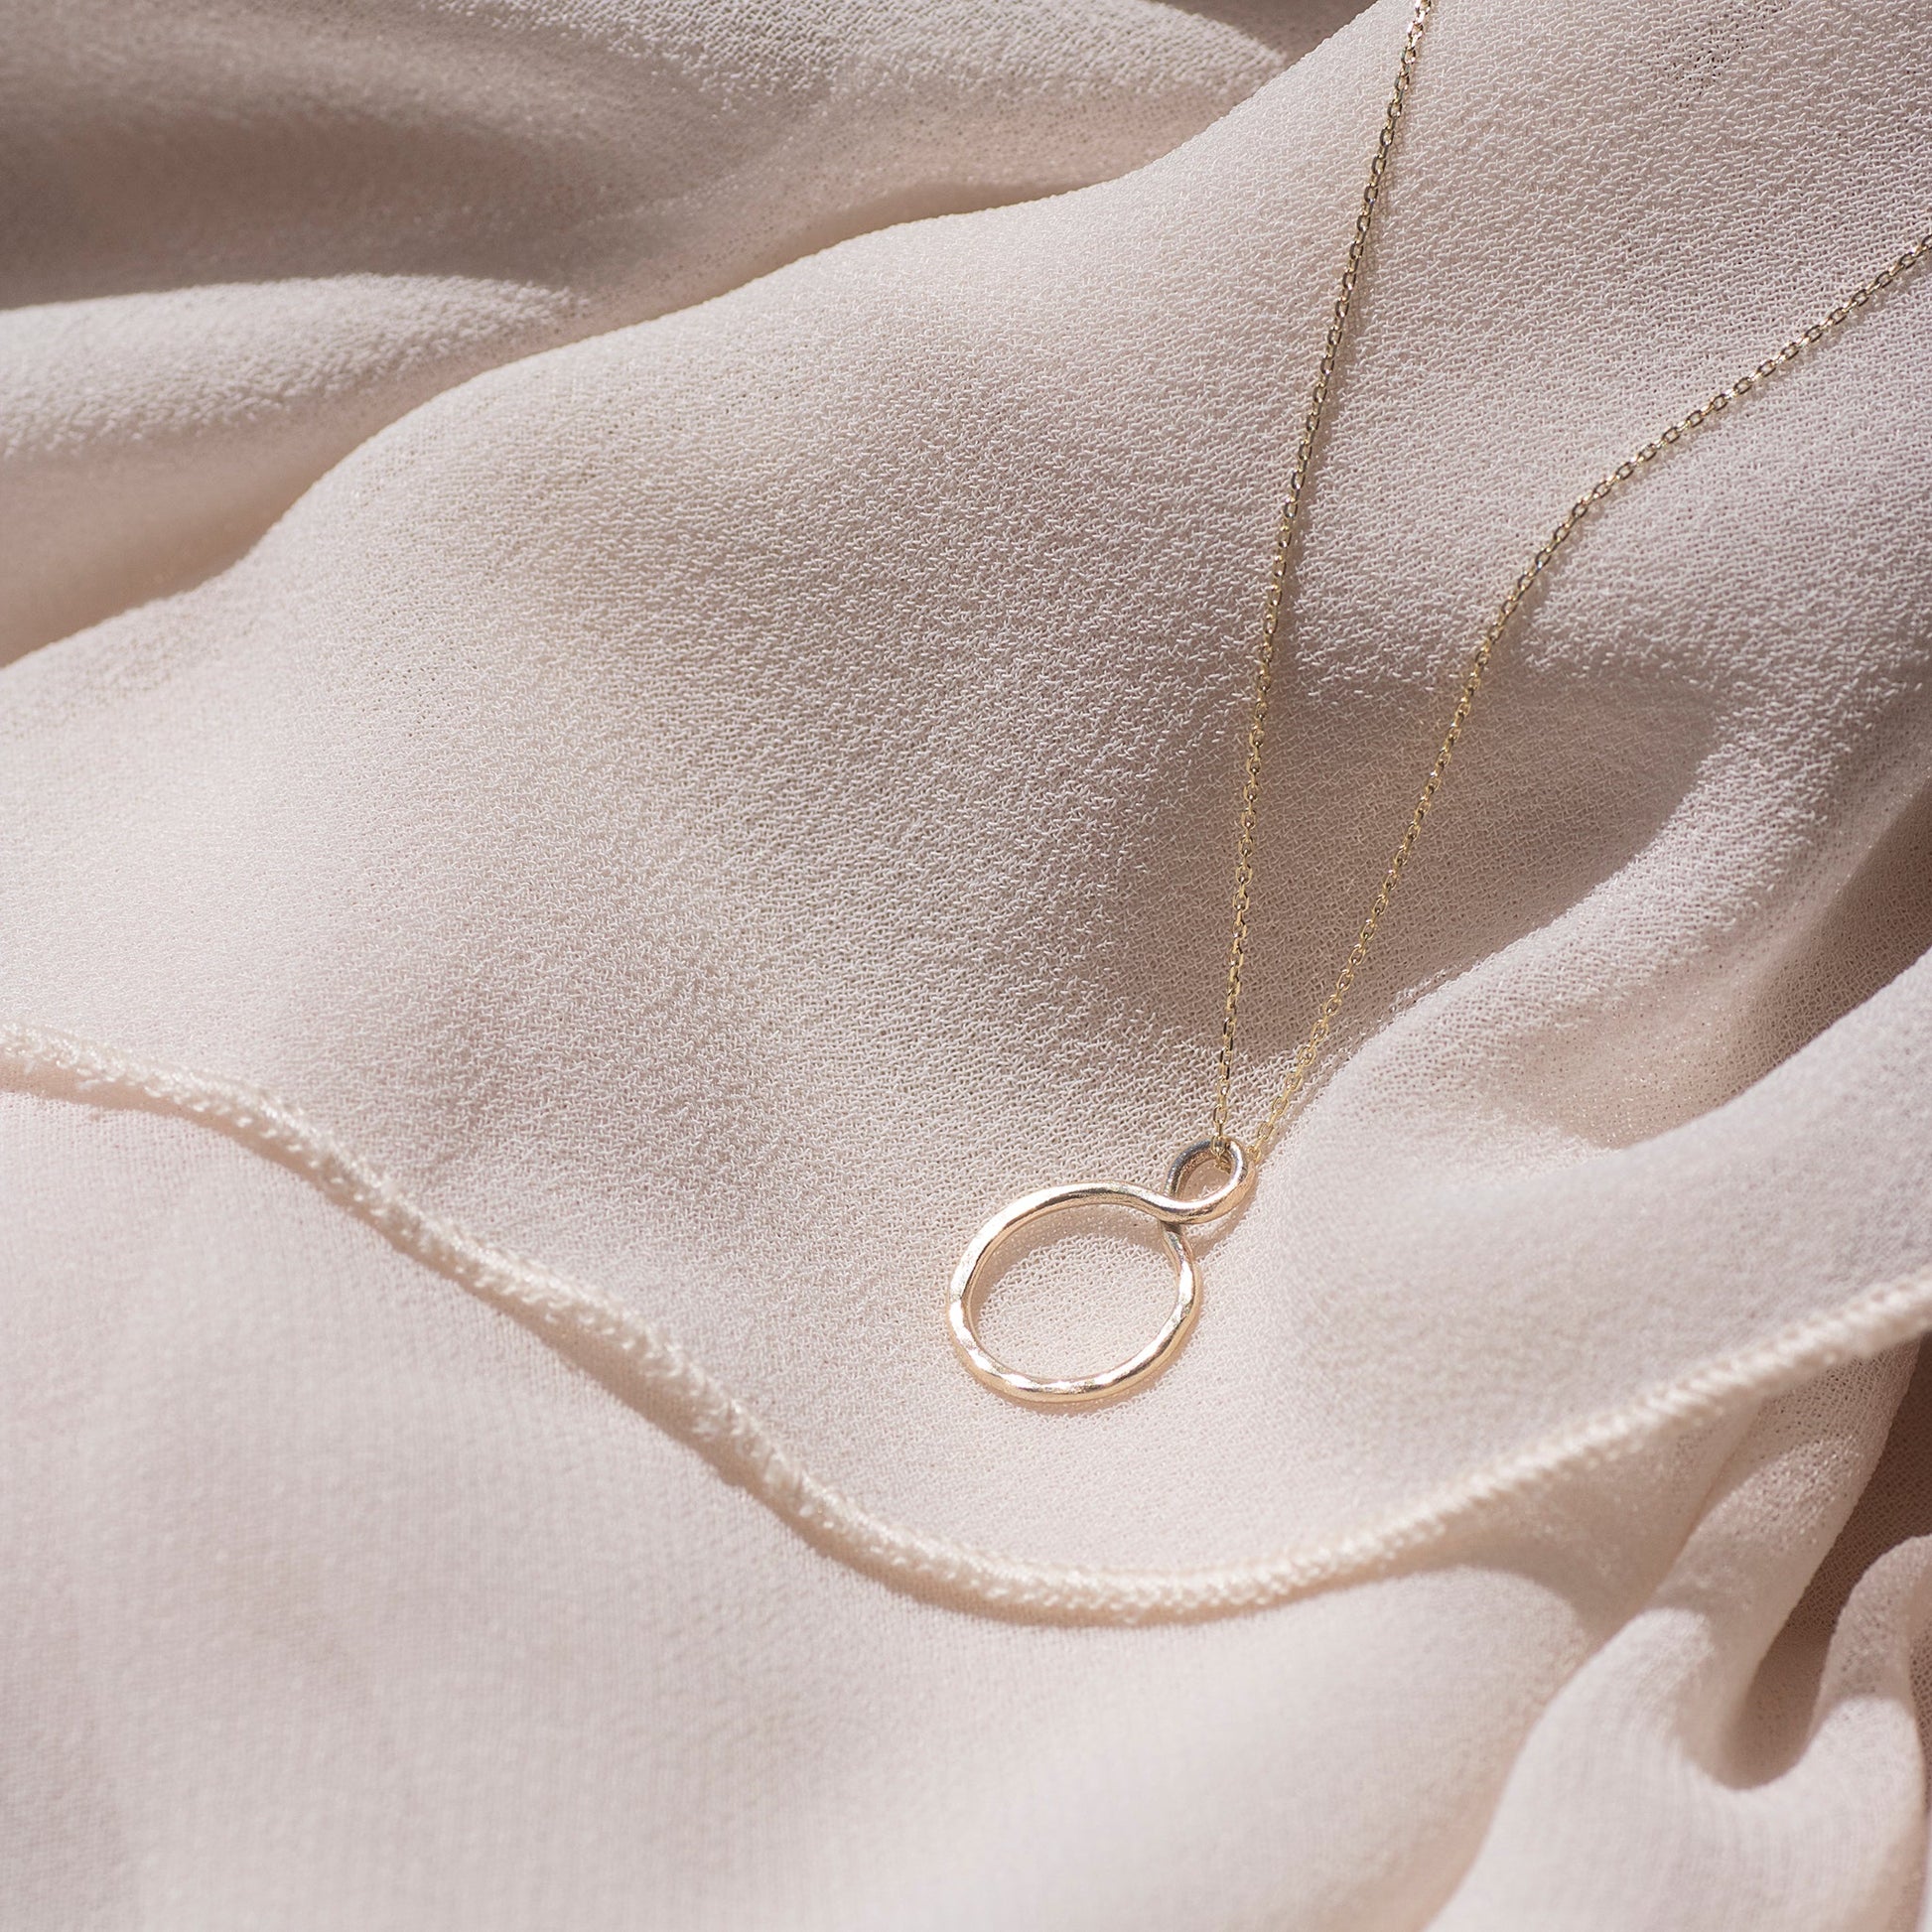 9kt gold infinity necklace